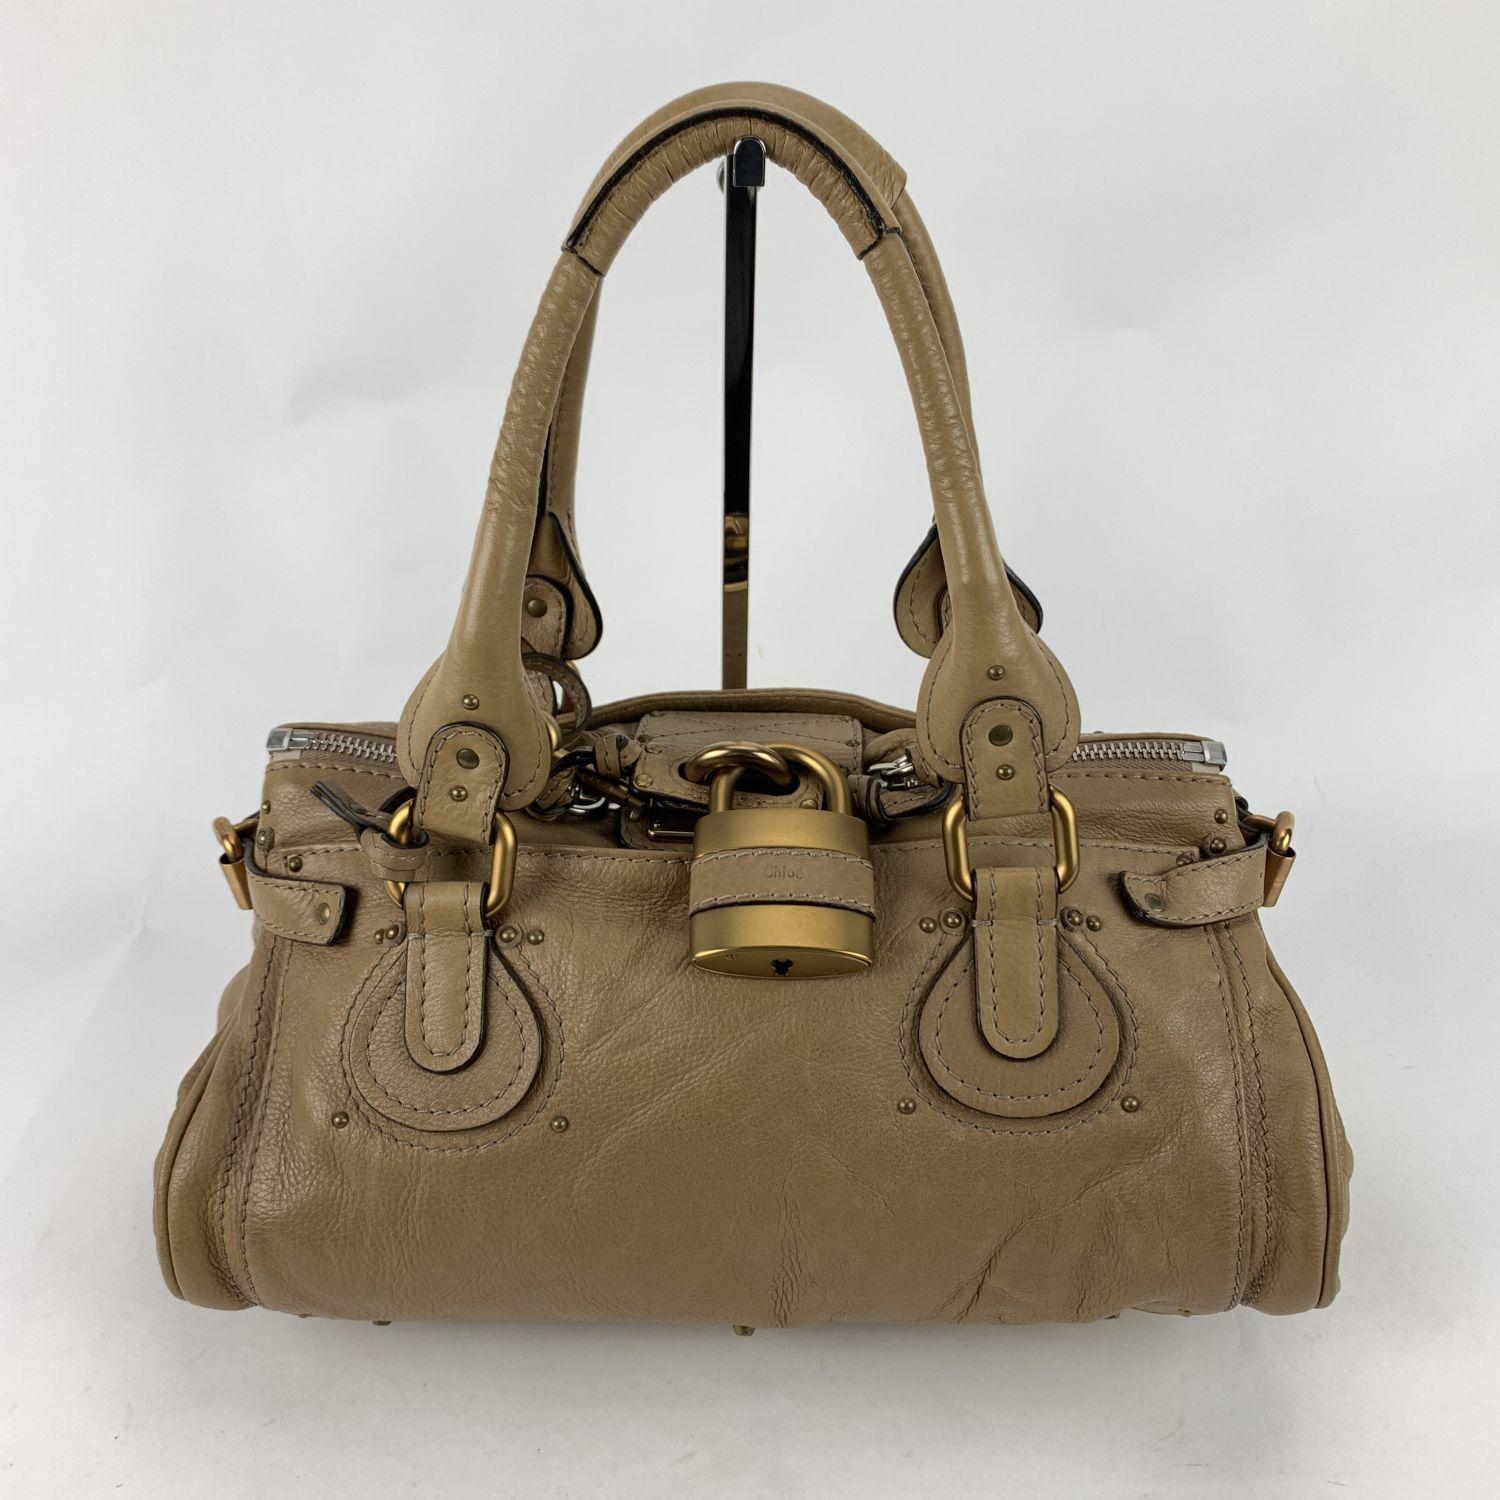 Gorgeous CHLOE 'Paddington Bag' crafted in genuine leather in a tan beige color. This bag features intense detailing such as chunky hardware, contrasted stitching and belting as well as two-rolled leather handles. At the front of the bag you will